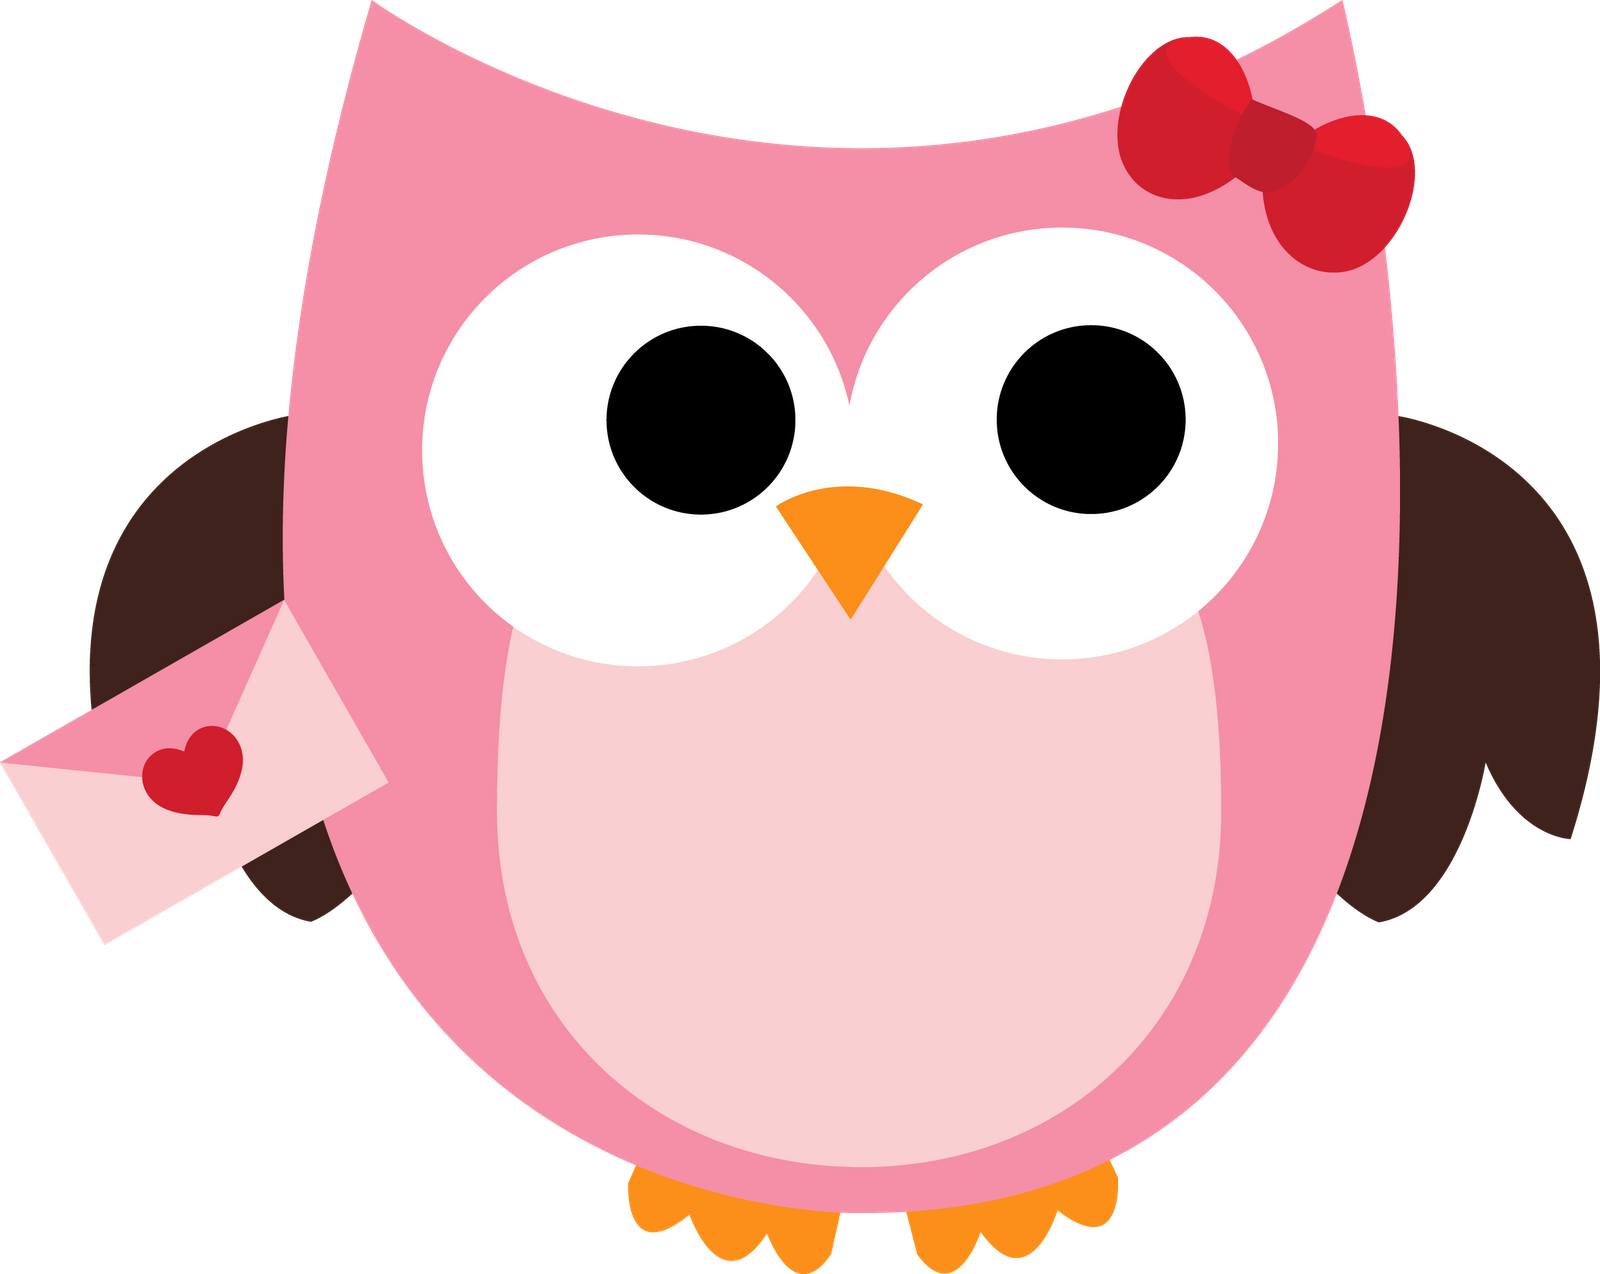 Cute Owl Images Free - ClipArt Best